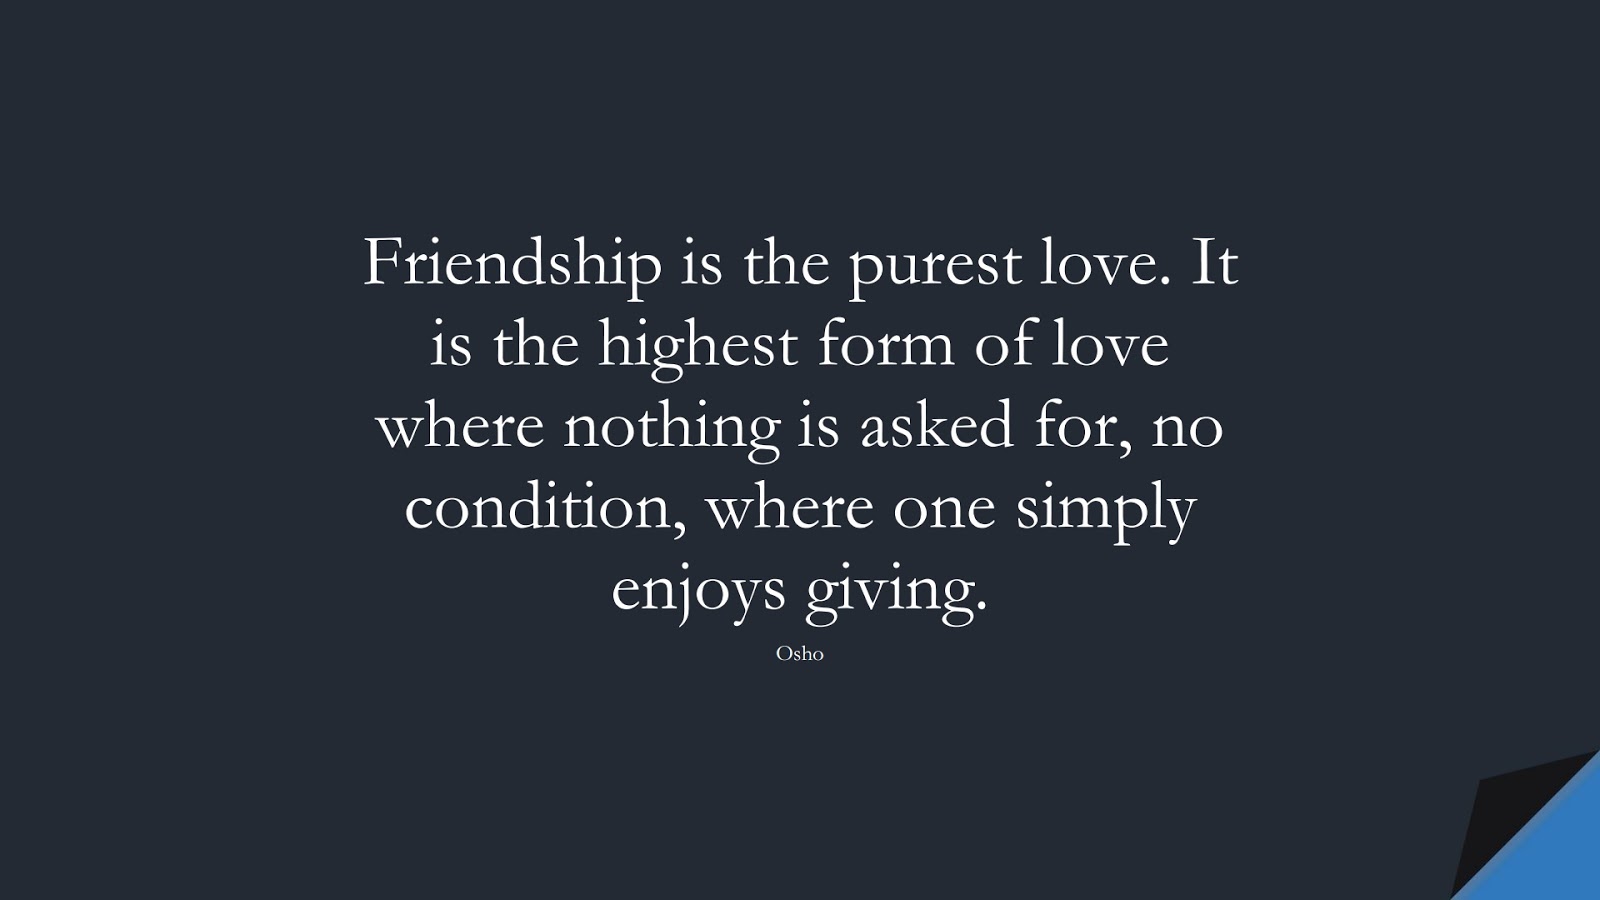 Friendship is the purest love. It is the highest form of love where nothing is asked for, no condition, where one simply enjoys giving. (Osho);  #FriendshipQuotes